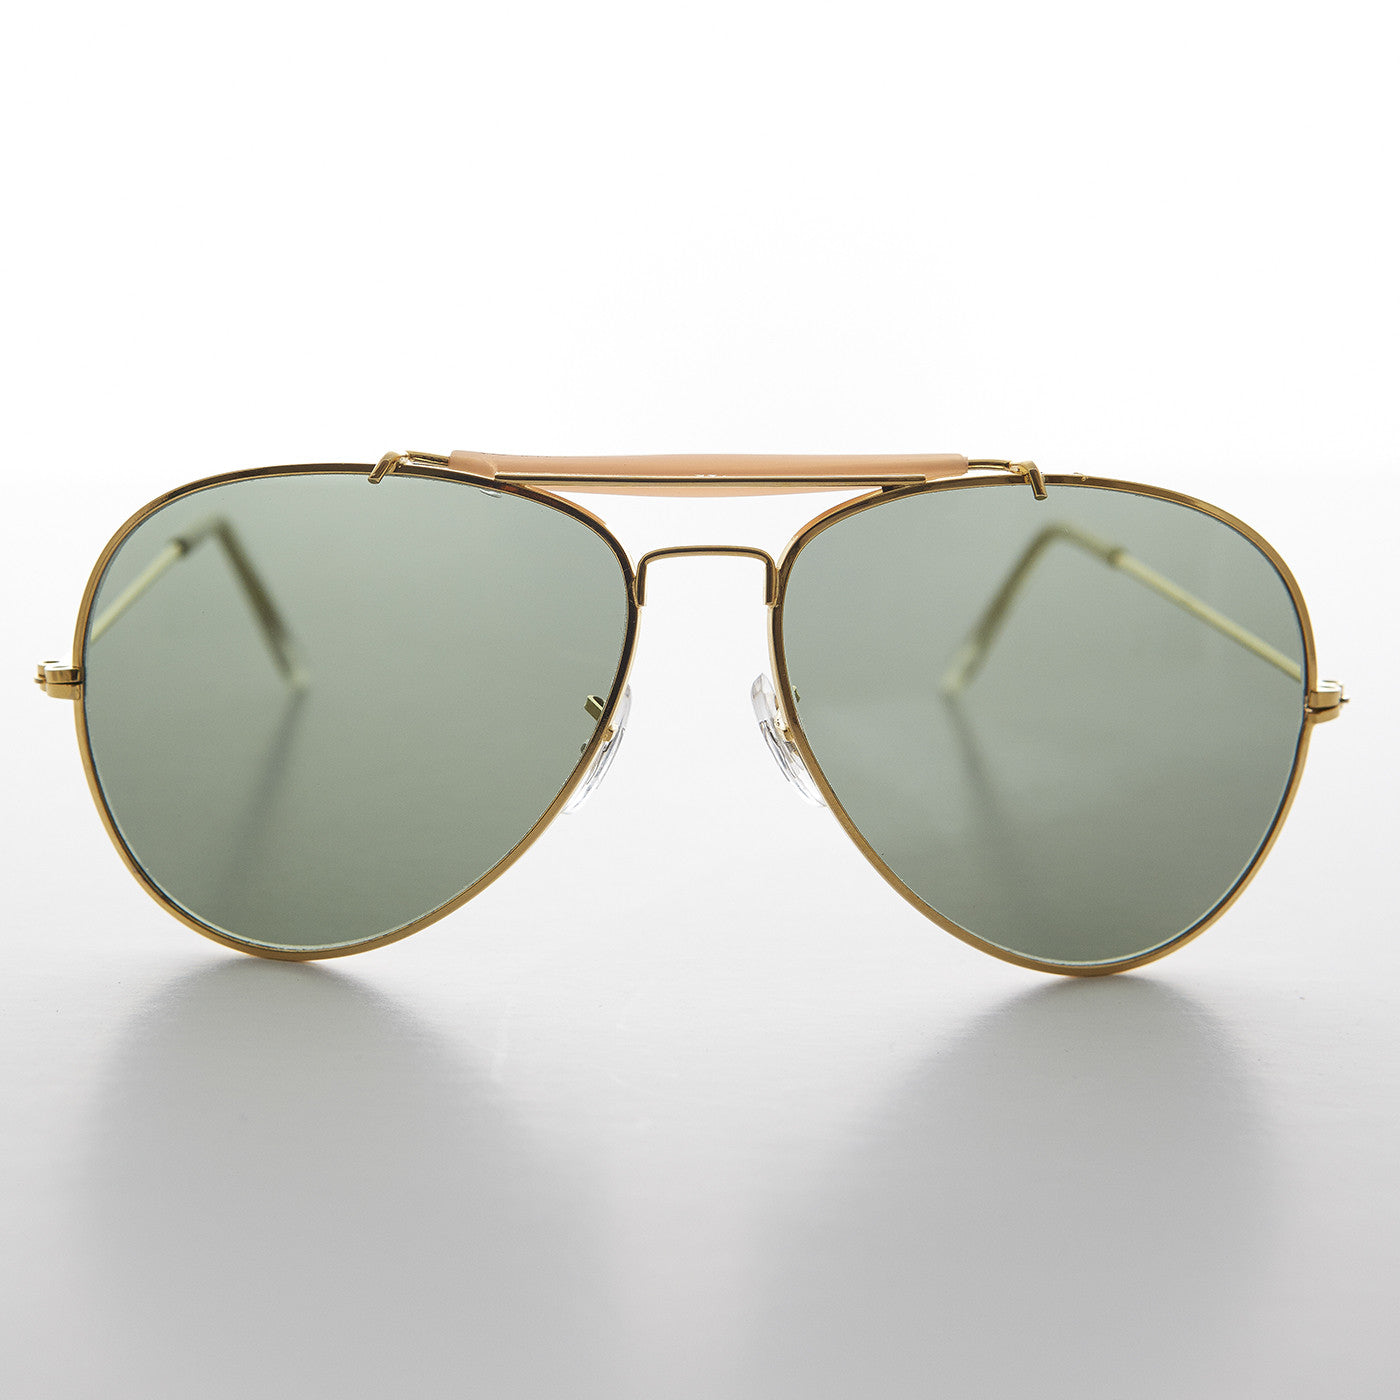 gold vintage aviator sunglass with brown bar